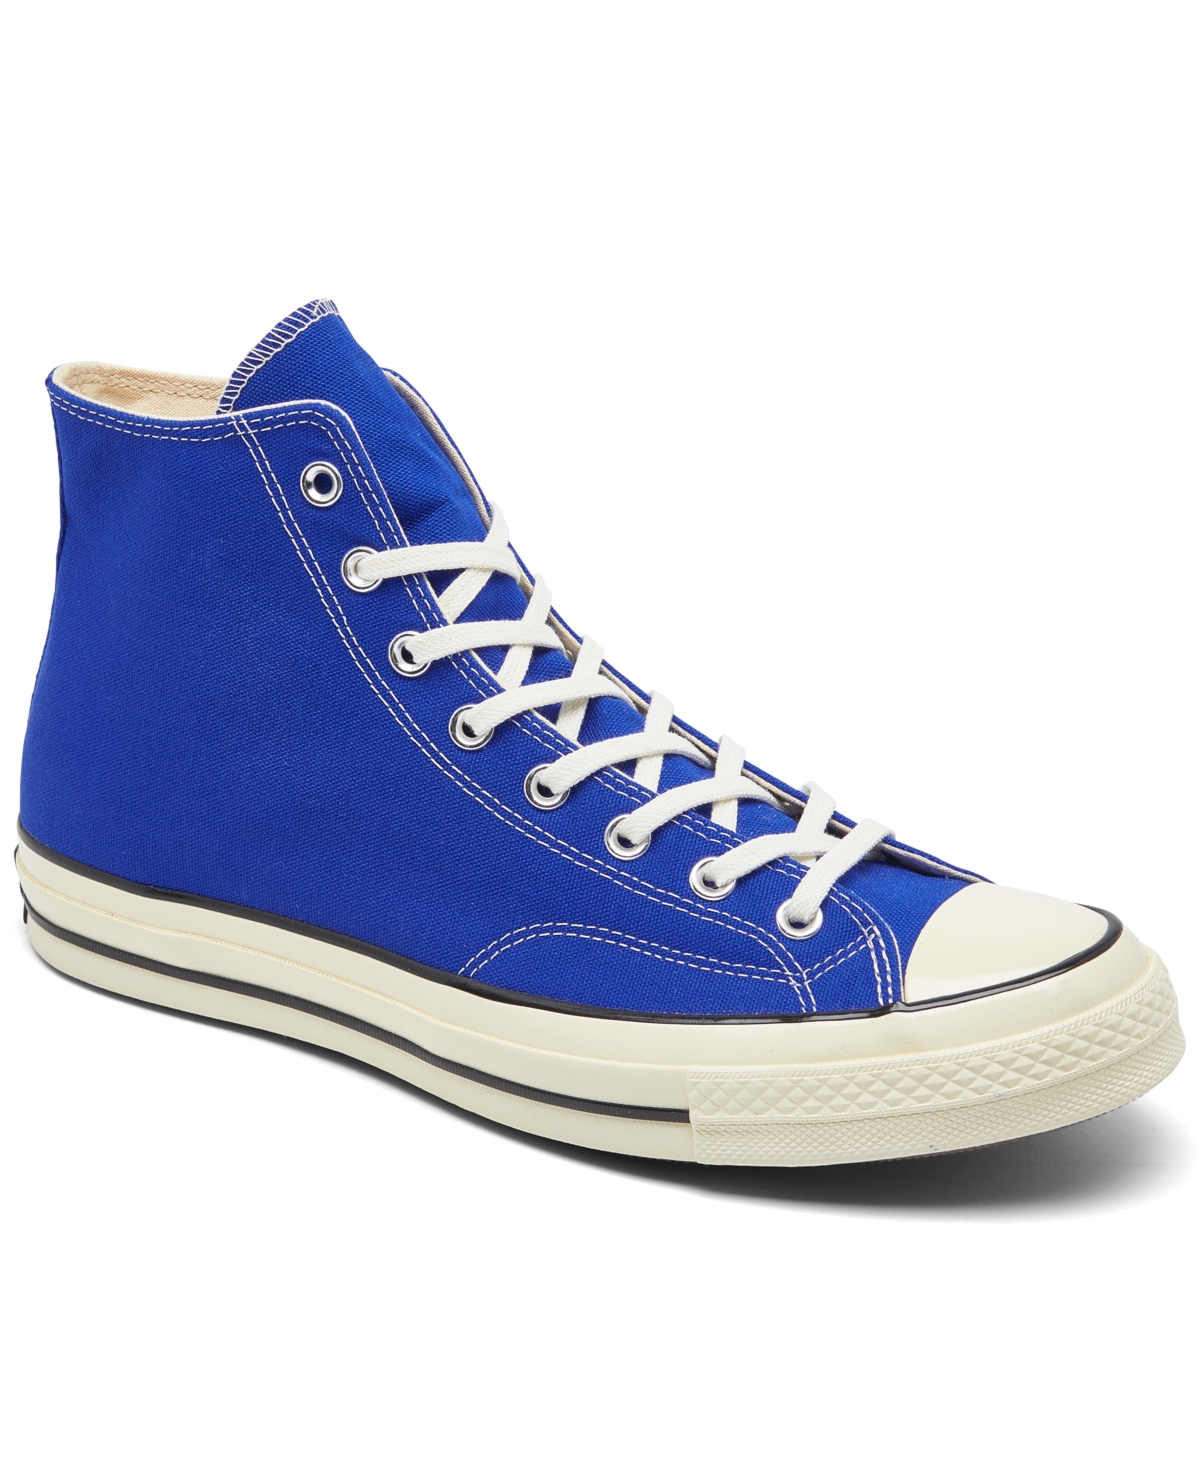 Converse Men's Chuck 70 Vintage-Like Canvas High Top Casual Sneakers from Finish Line - Nice Blue, Black